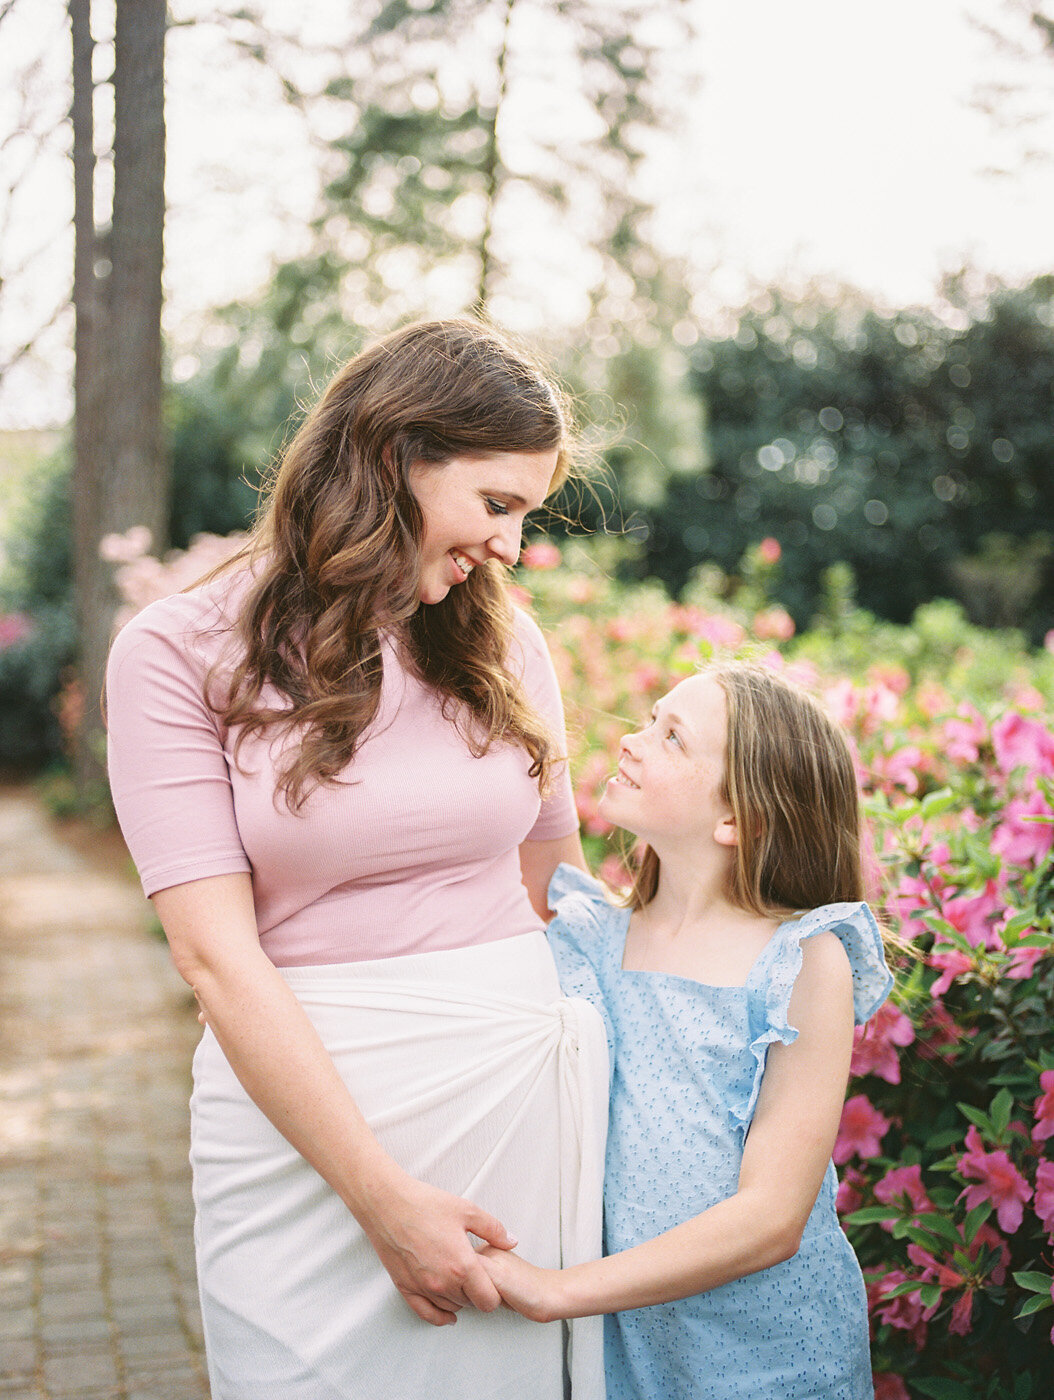 Raleigh Family Photographer | Jessica Agee Photography - 047